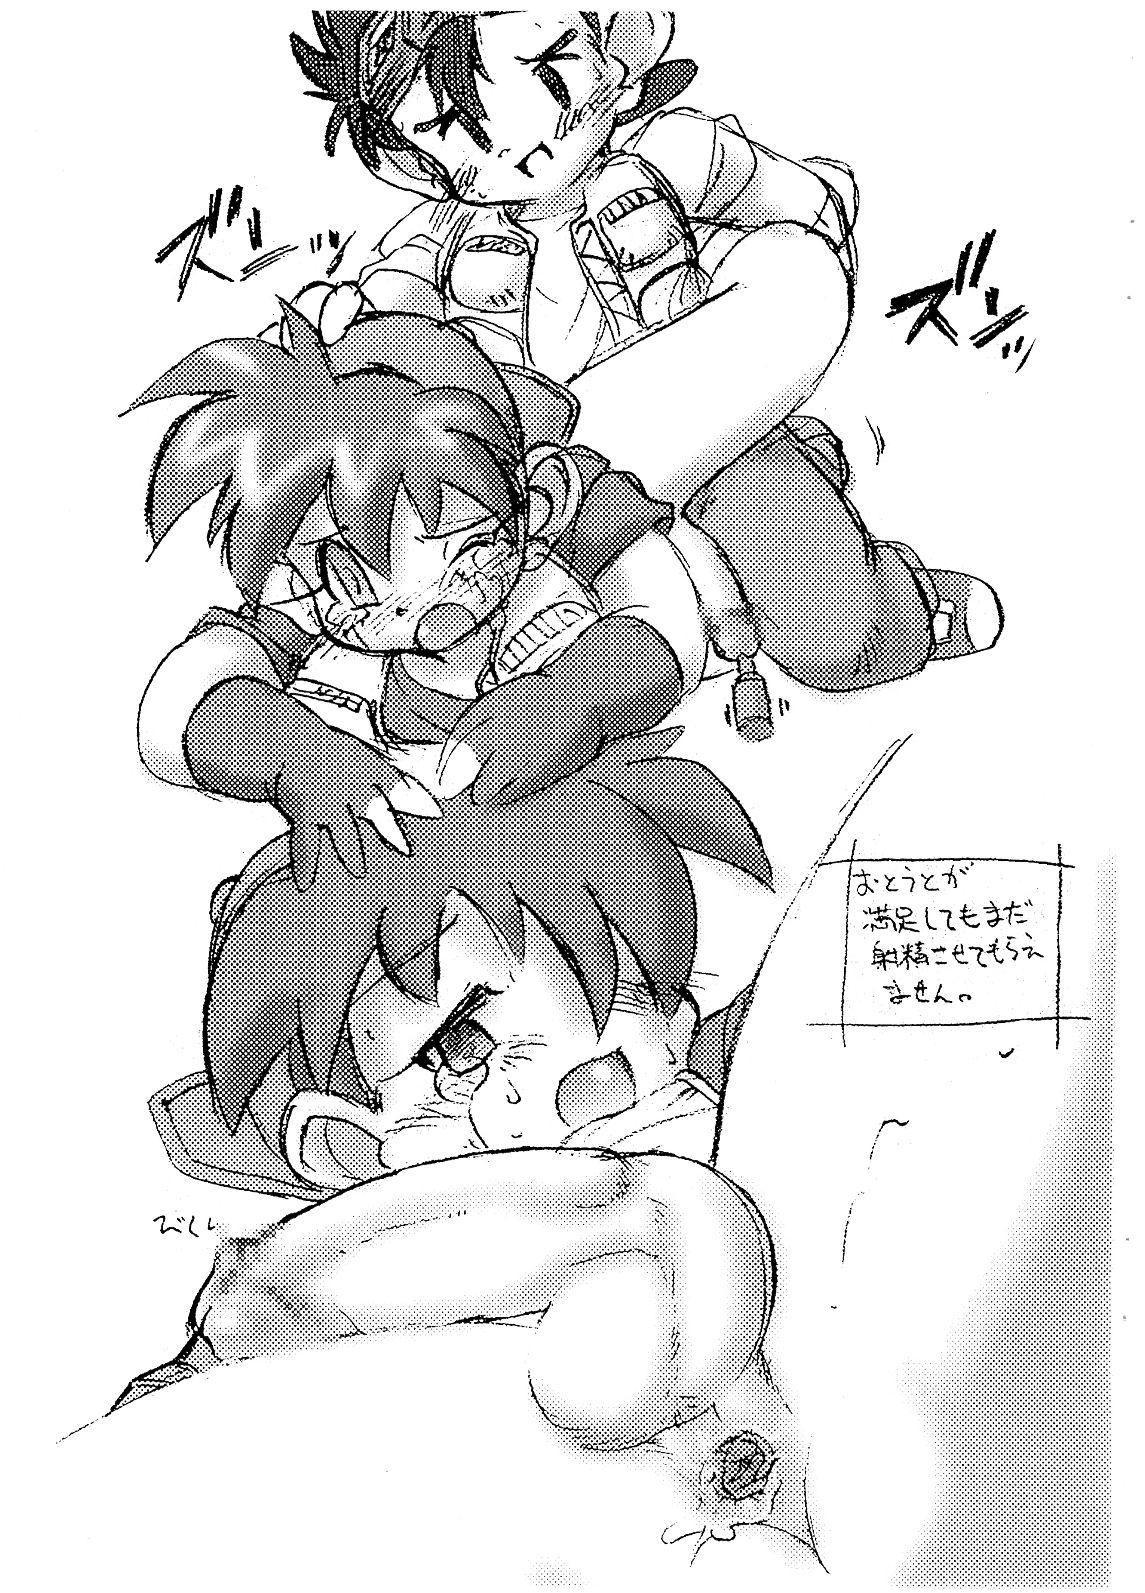 Cocksuckers TOUCH DASH! + Omake - The legend of zelda Bakusou kyoudai lets and go Big Booty - Page 4